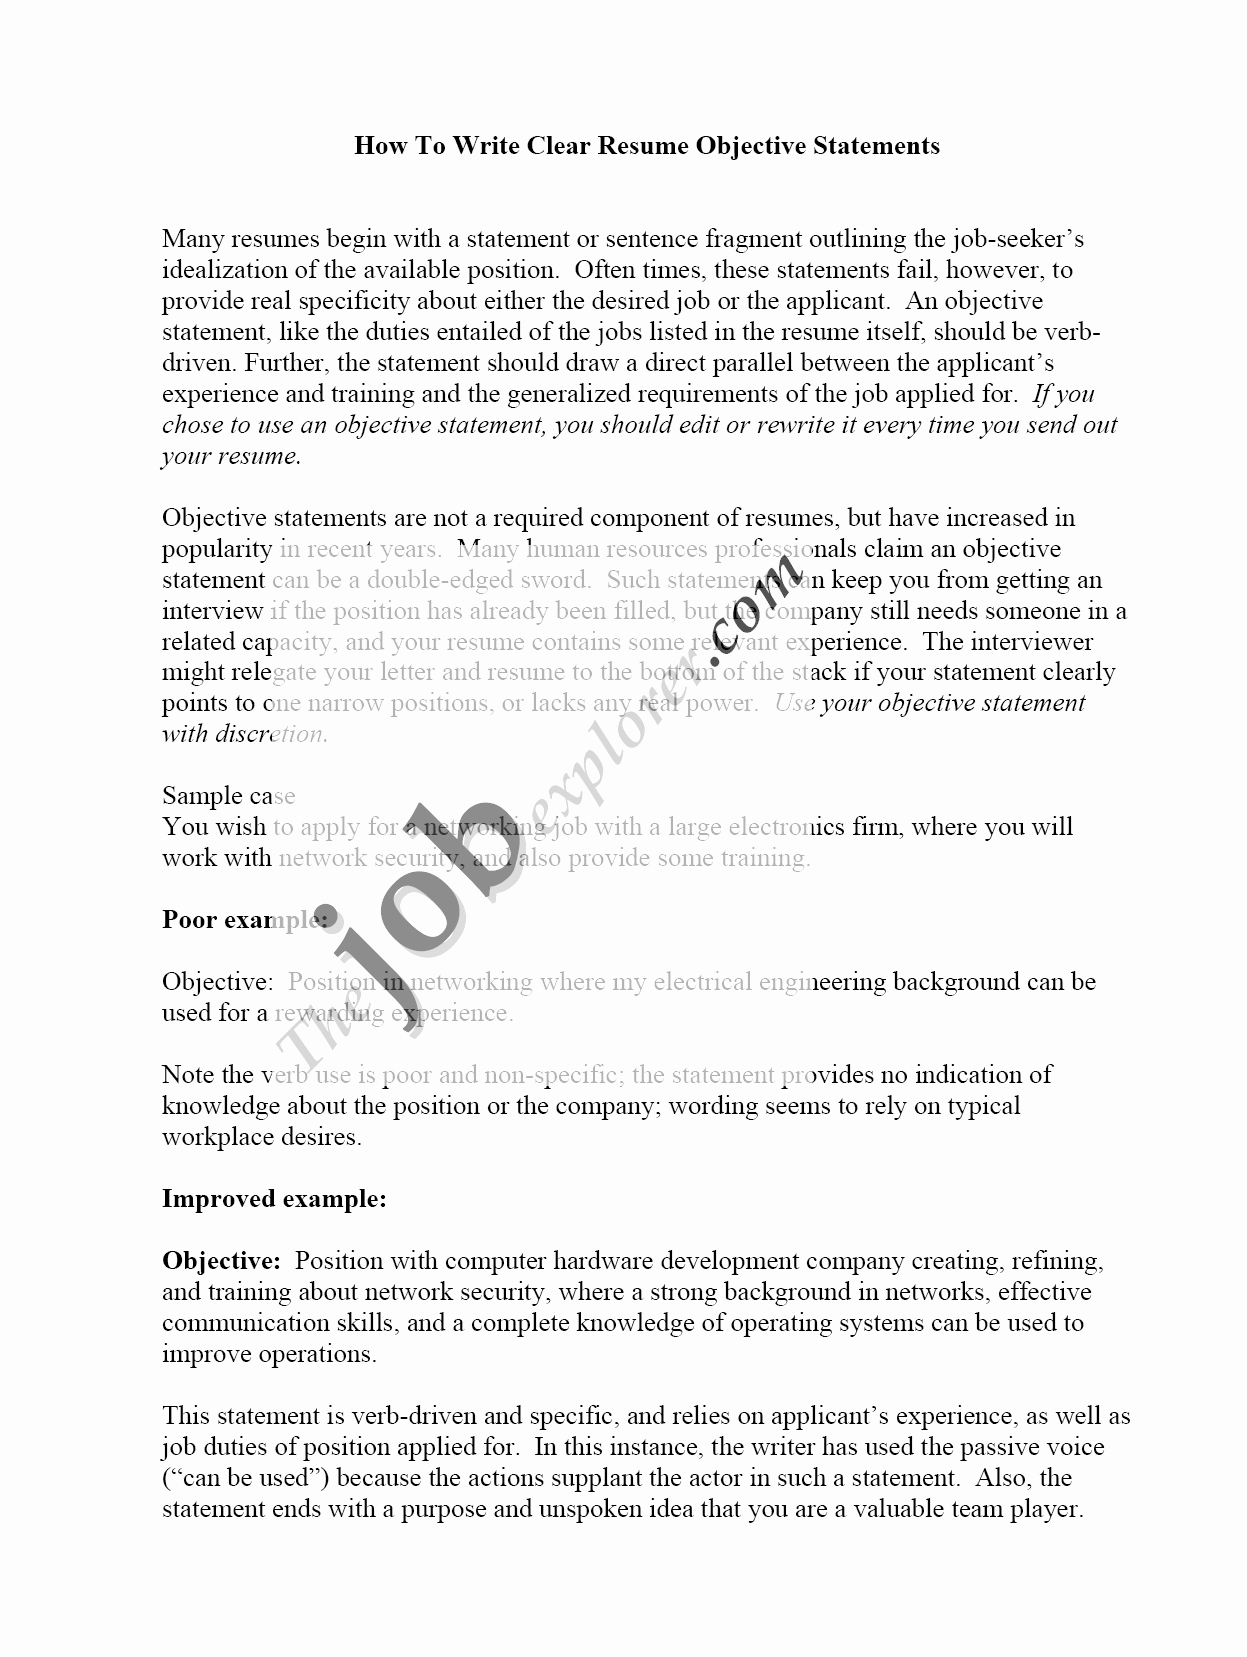 Samples Of Objective On Resume Luxury why Resume Objective is Important